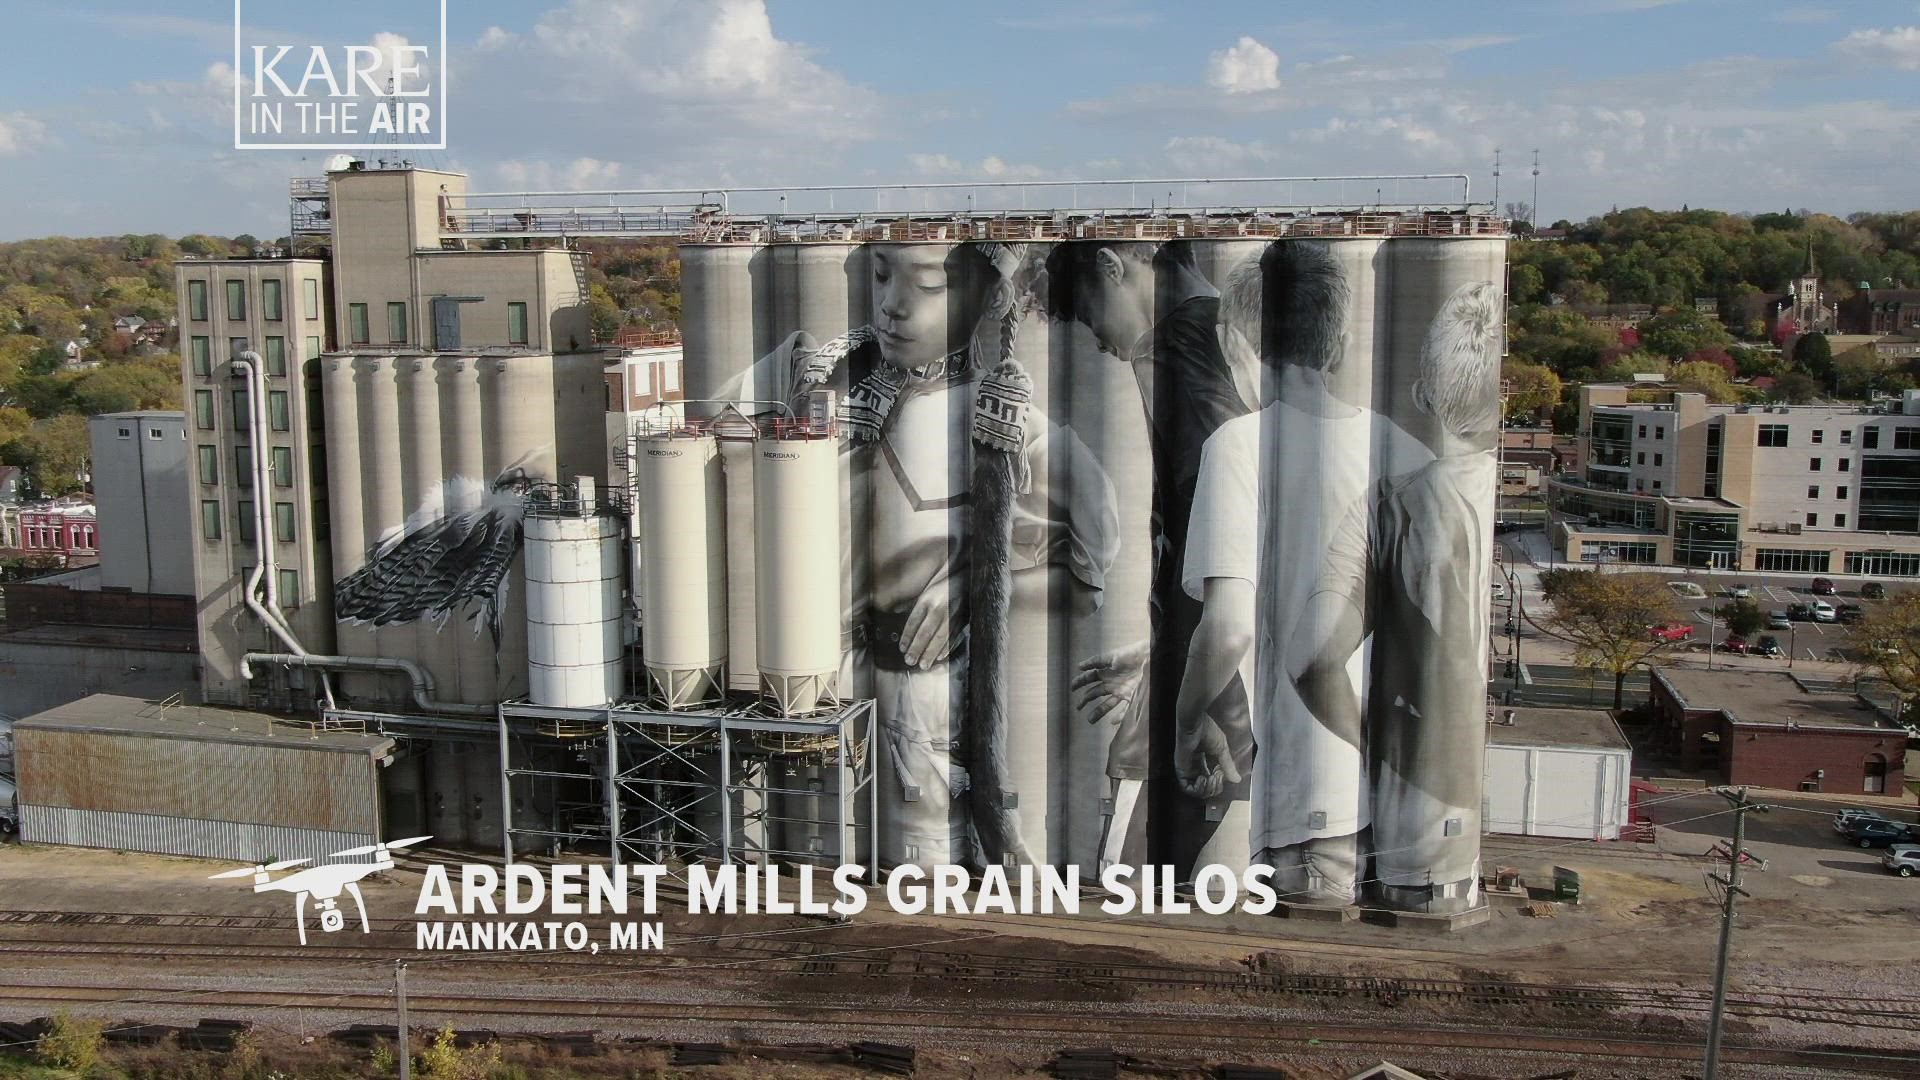 Australian artist Guido Van Helten has painted murals all over the globe, but in 2019 he began working on eight 135-foot tall silos at the old Ardent Mills site.